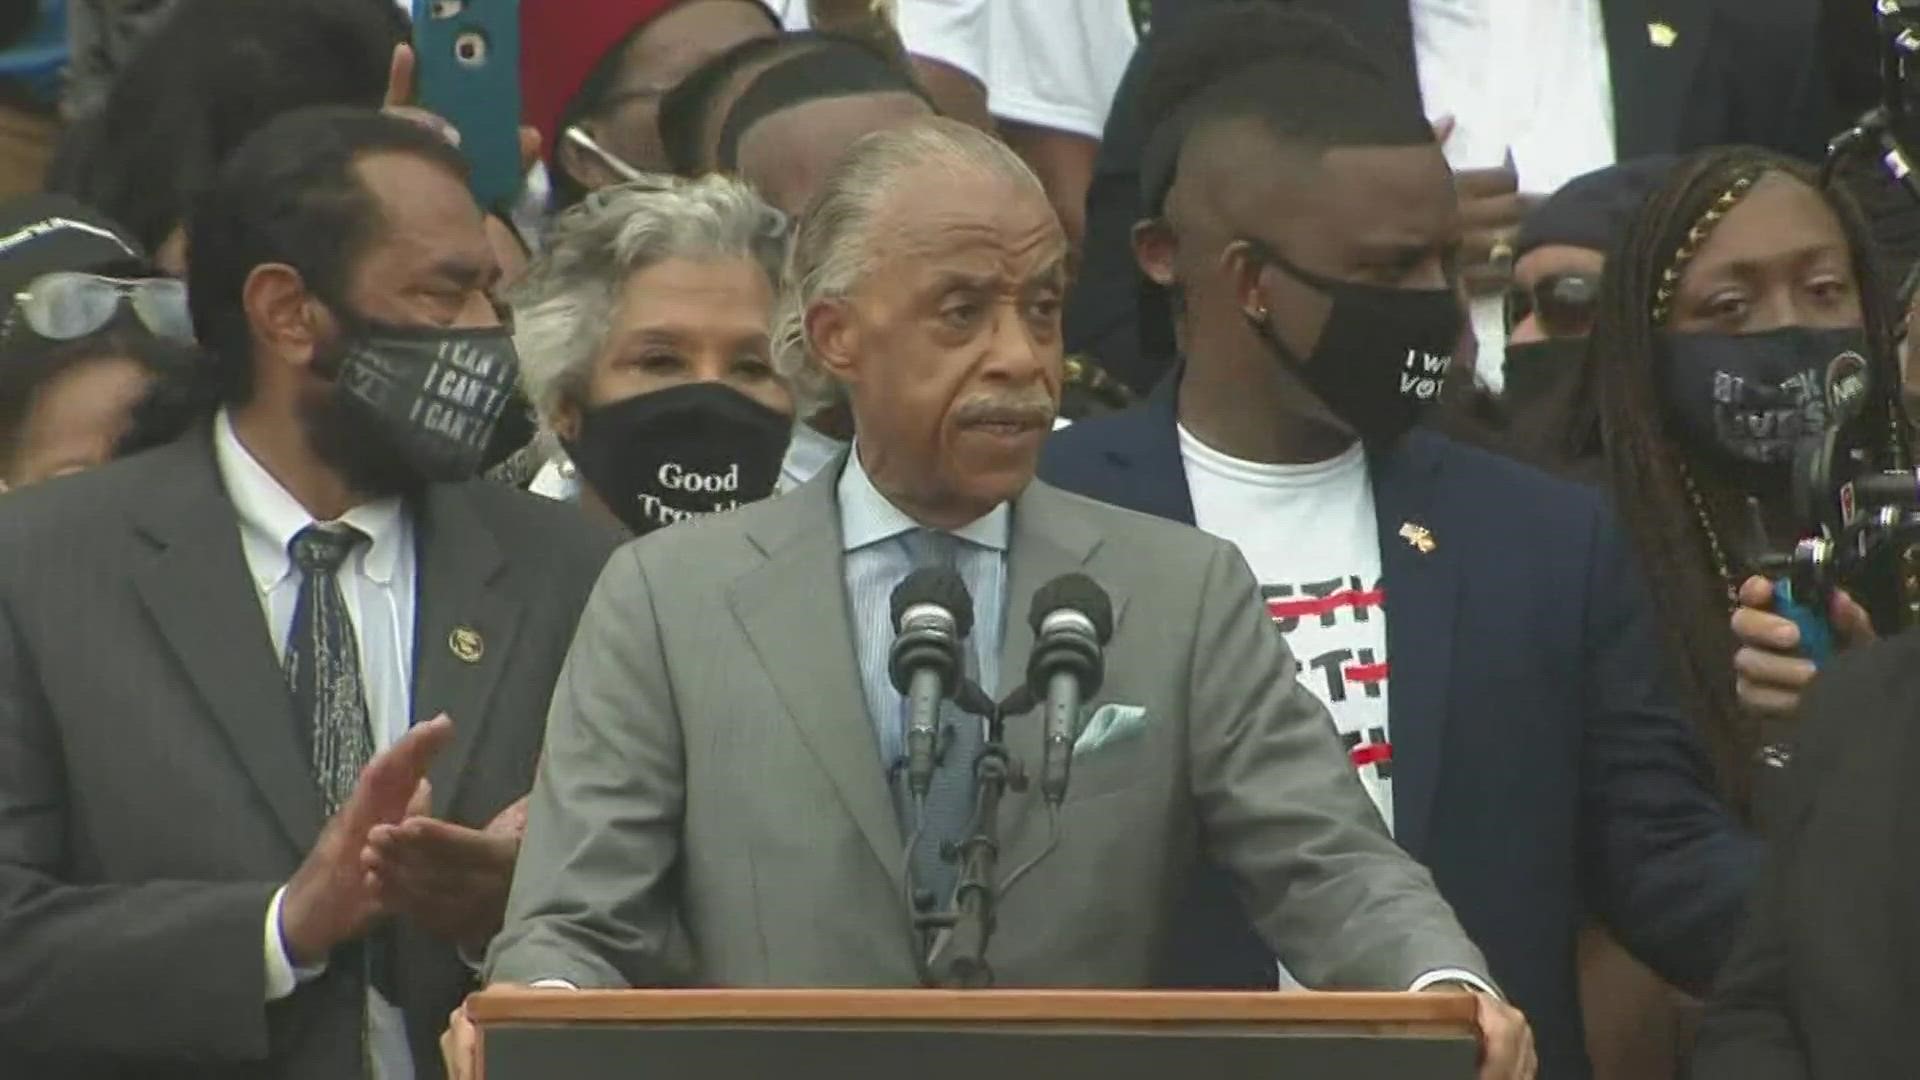 Rev. Al Sharpton, founder and president of National Action Network, speaks at the March on Washington in D.C.